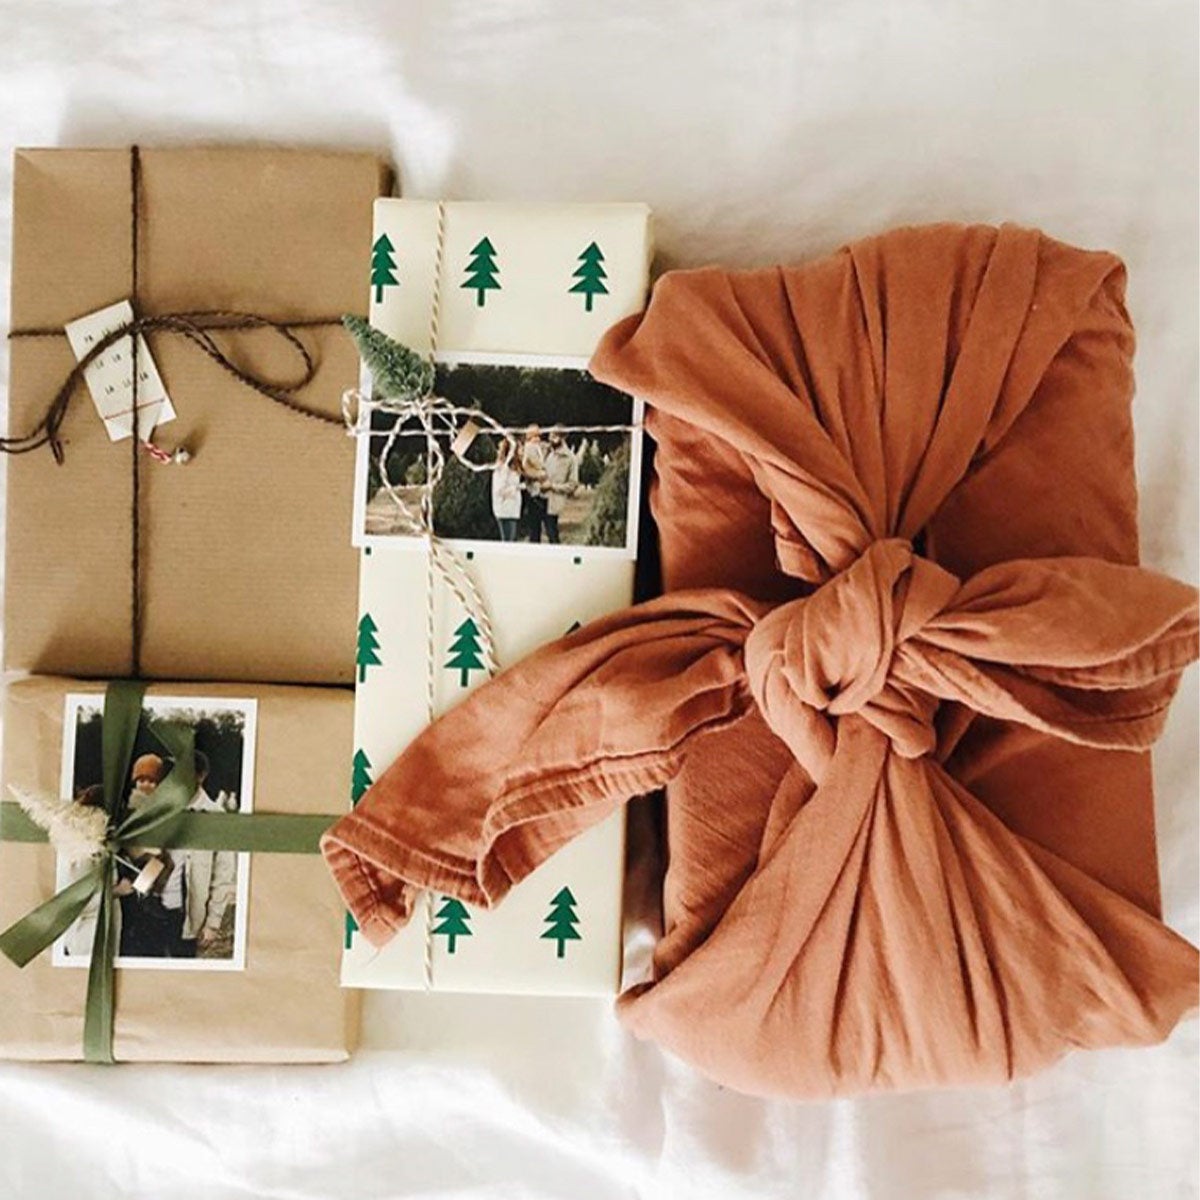 Creatively wrapped gifts with photo prints on them